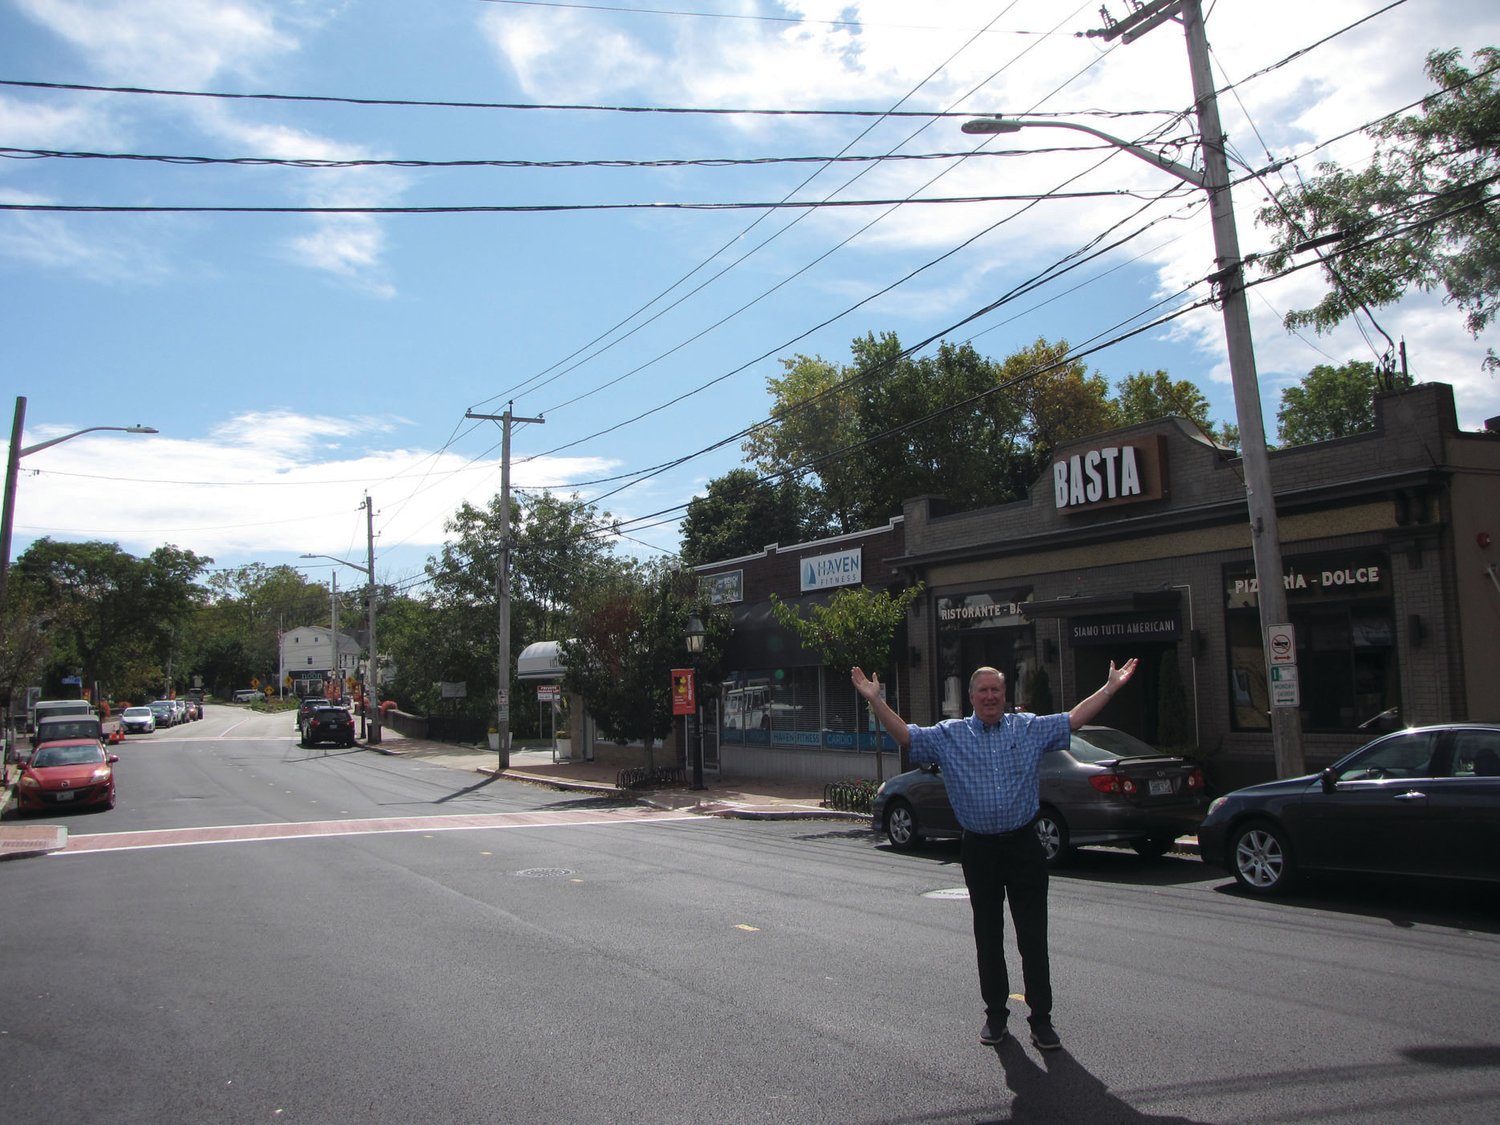 IN THE VILLAGE: Mayor Ken Hopkins pauses while crossing Broad Street during a recent interview with the Herald. Pawtuxet Village, which will host the Gaspee Days 250th anniversary celebration next year, has been the focus of the administration’s latest neighborhood revitalization project.